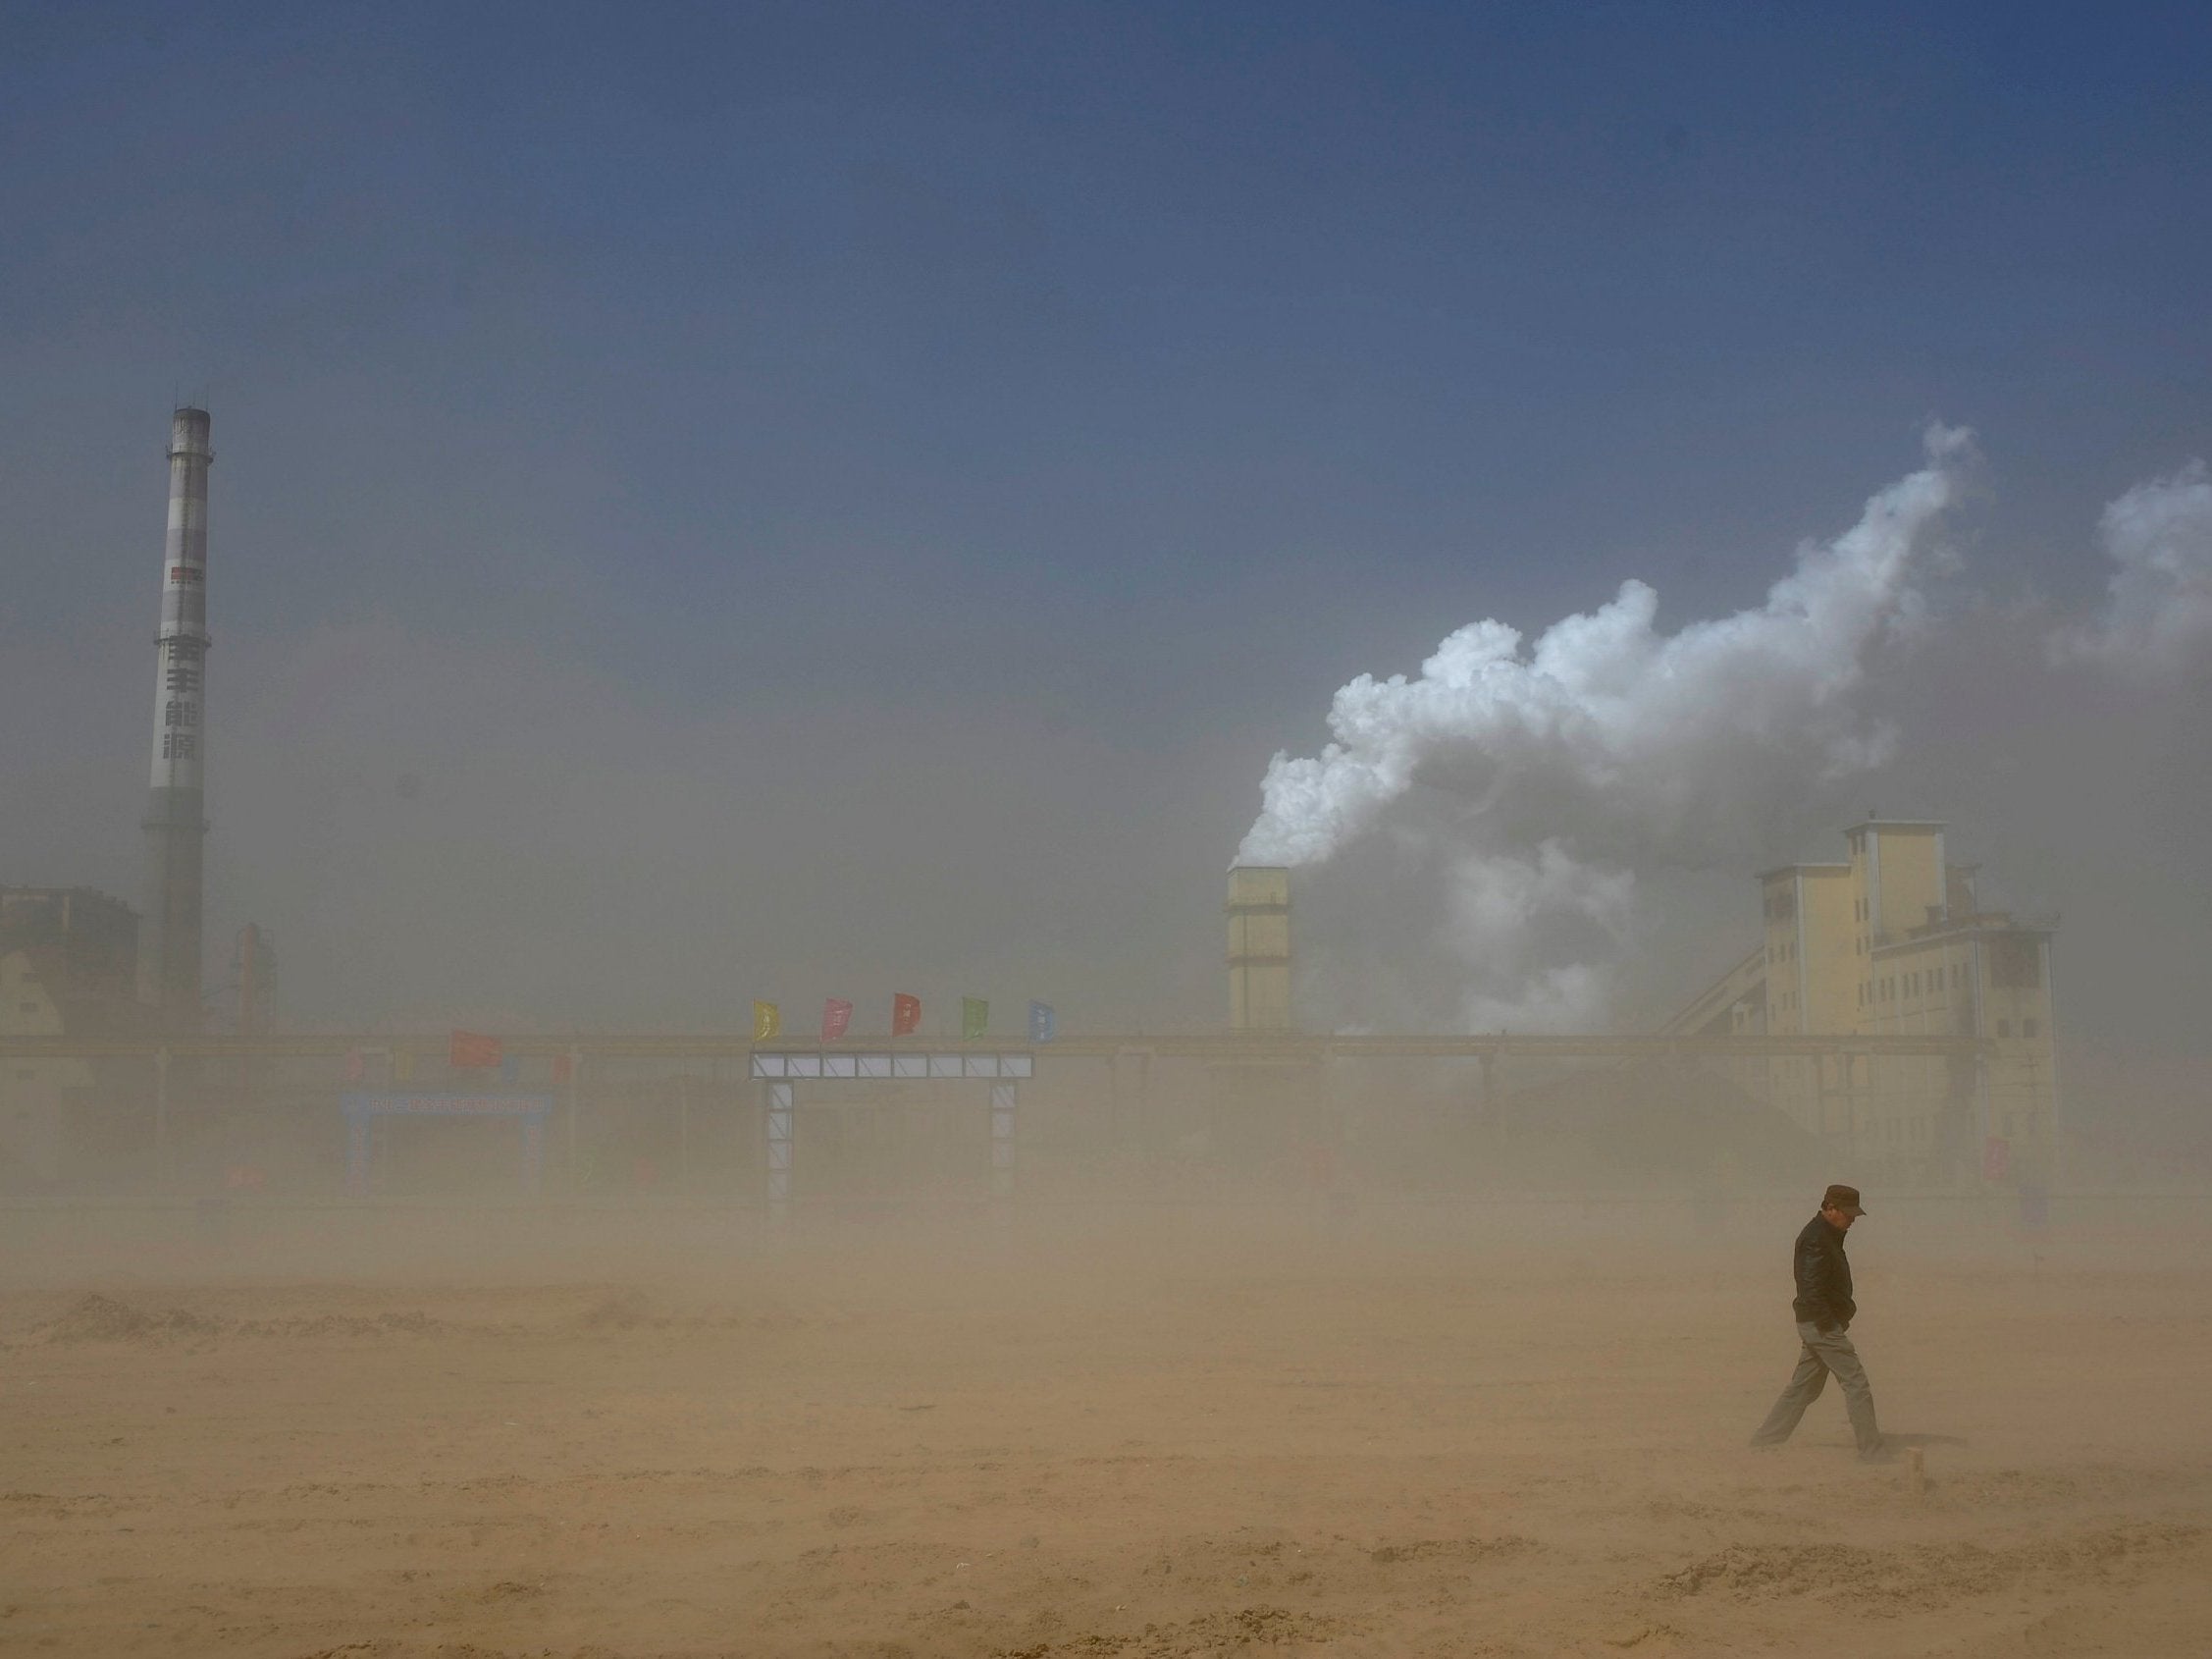 A coal plant partly obscured by a dust storm in China's Ningxia Hui autonomous region; the country is one of the worst offenders when it comes to emissions